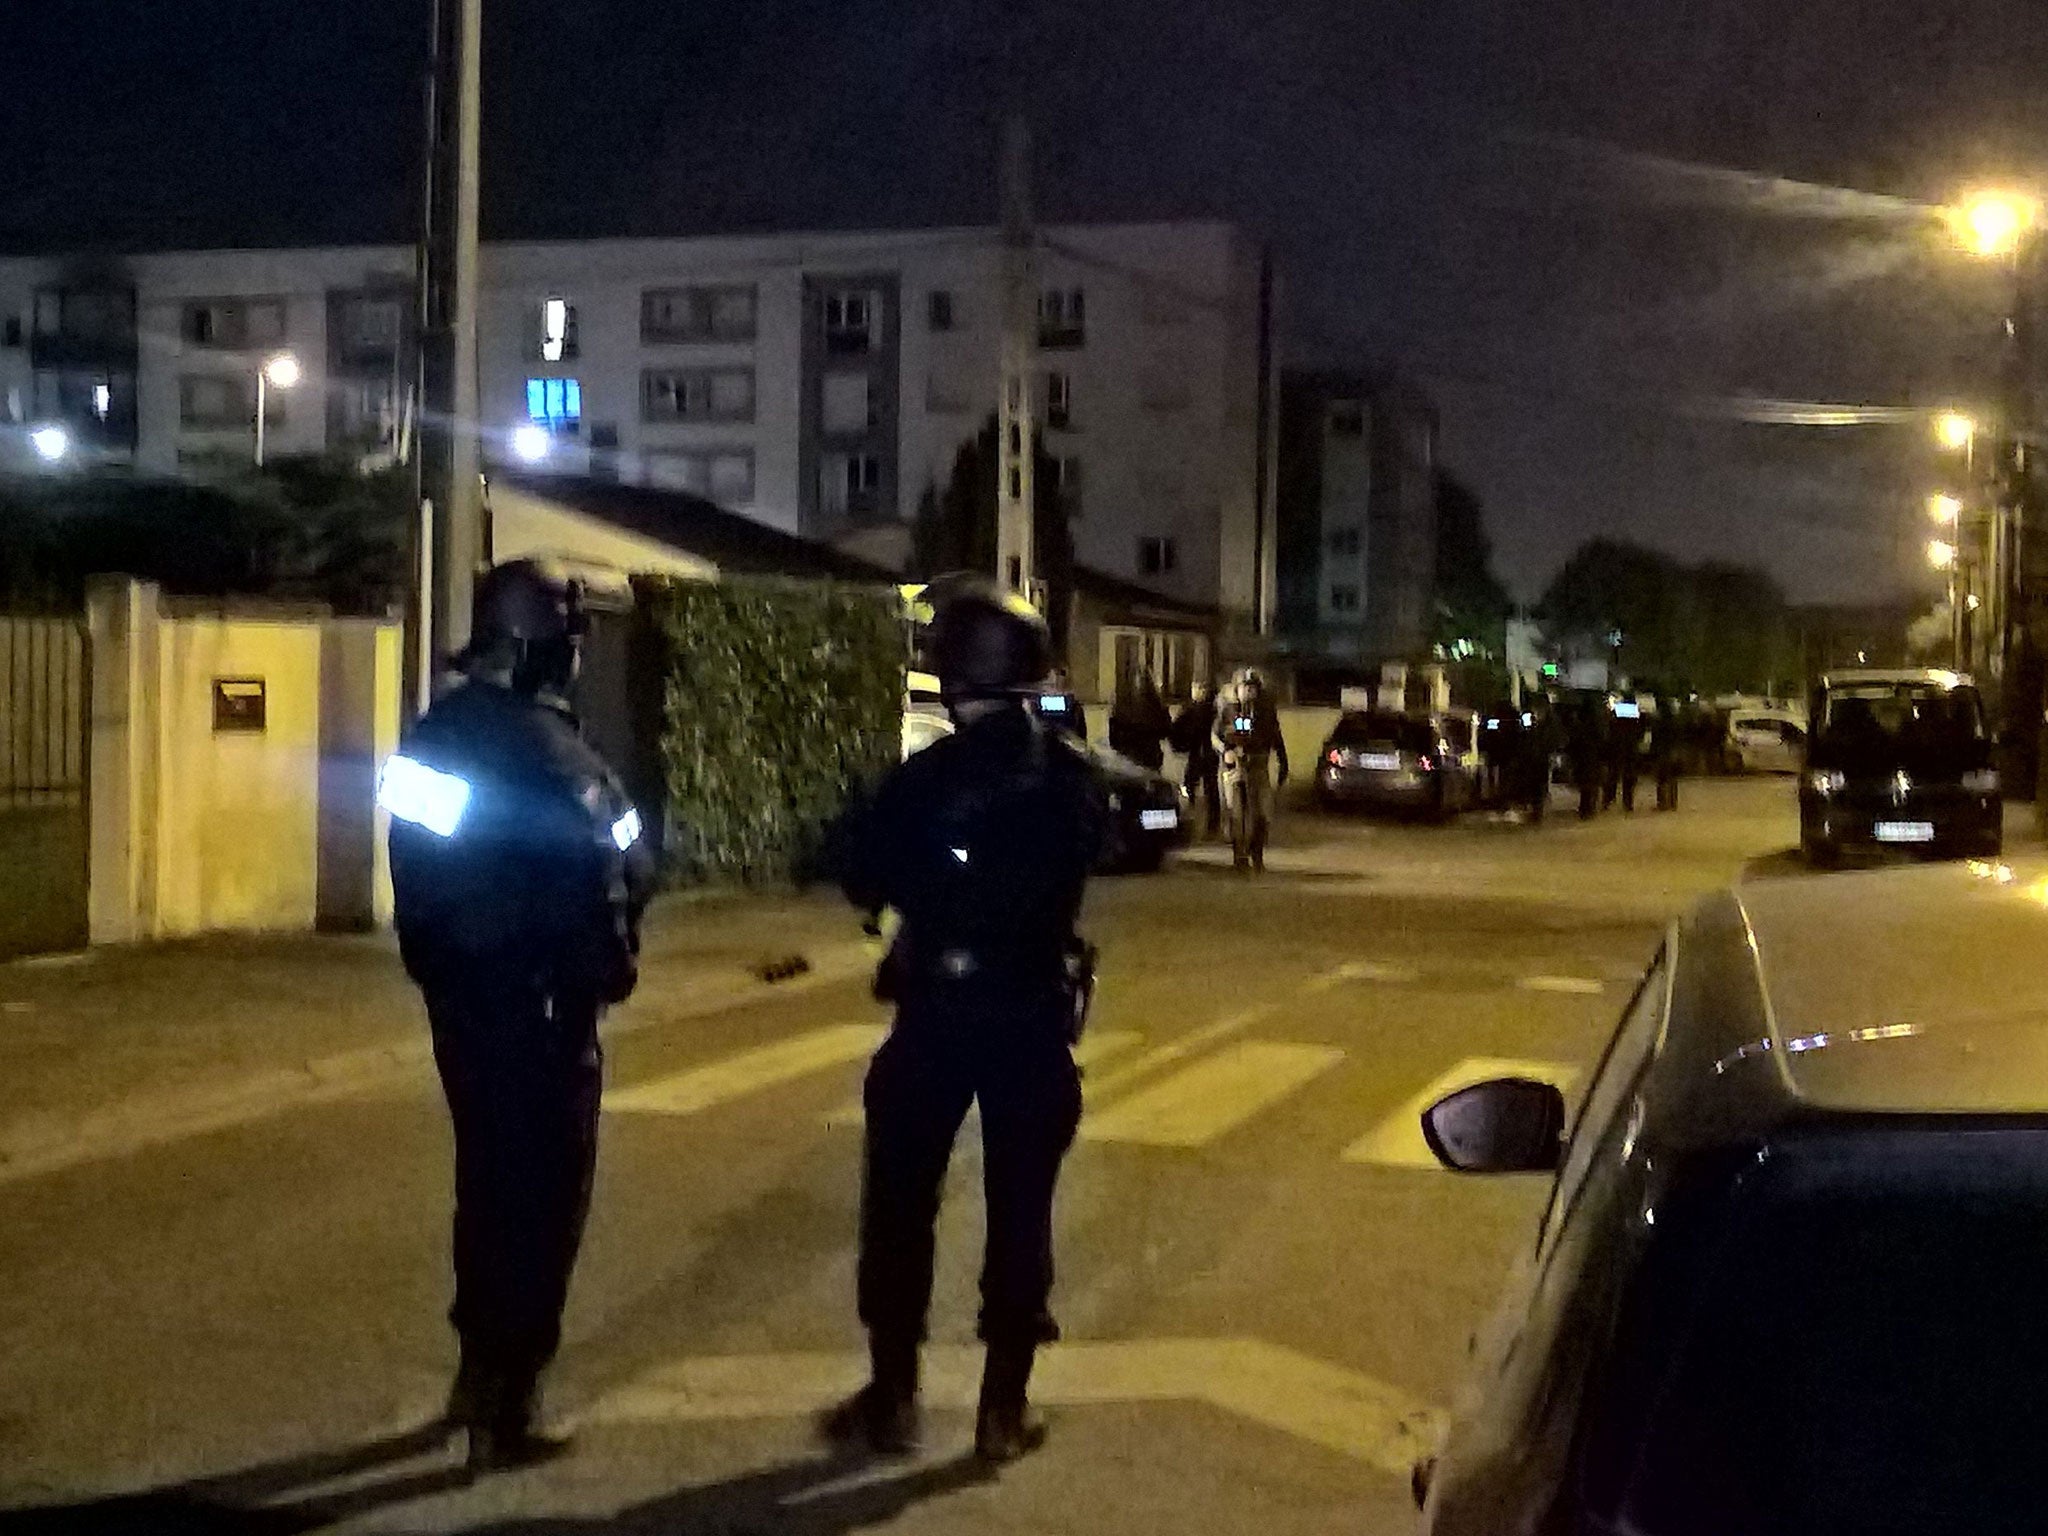 &#13;
Police officers search Cheurfi’s family home in the Parisian suburb of Chelles (AFP/Getty)&#13;